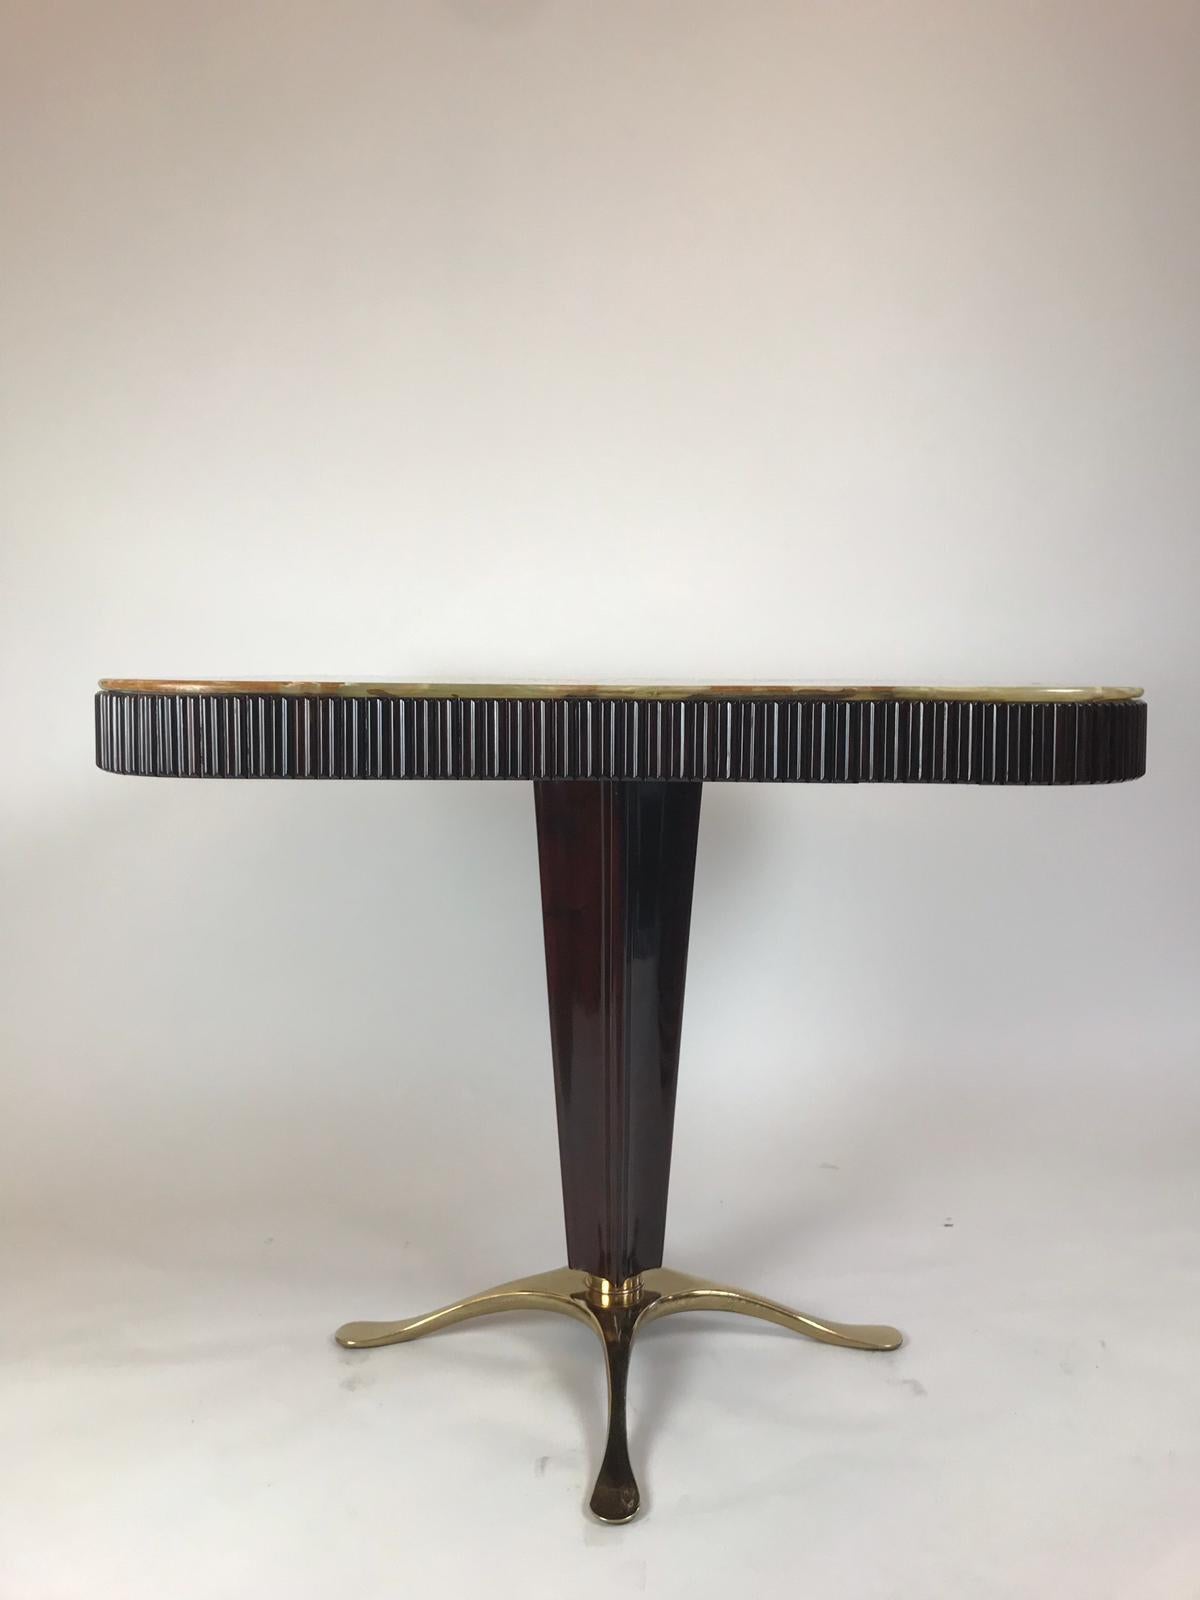 A fabulous occasional/small dining table designed by Paolo Buffa. It is designed in mahogany with a pedestal central leg with brass feet and has elegant fluting around the sides. On top sits the original onyx. It has been fully restored and is a